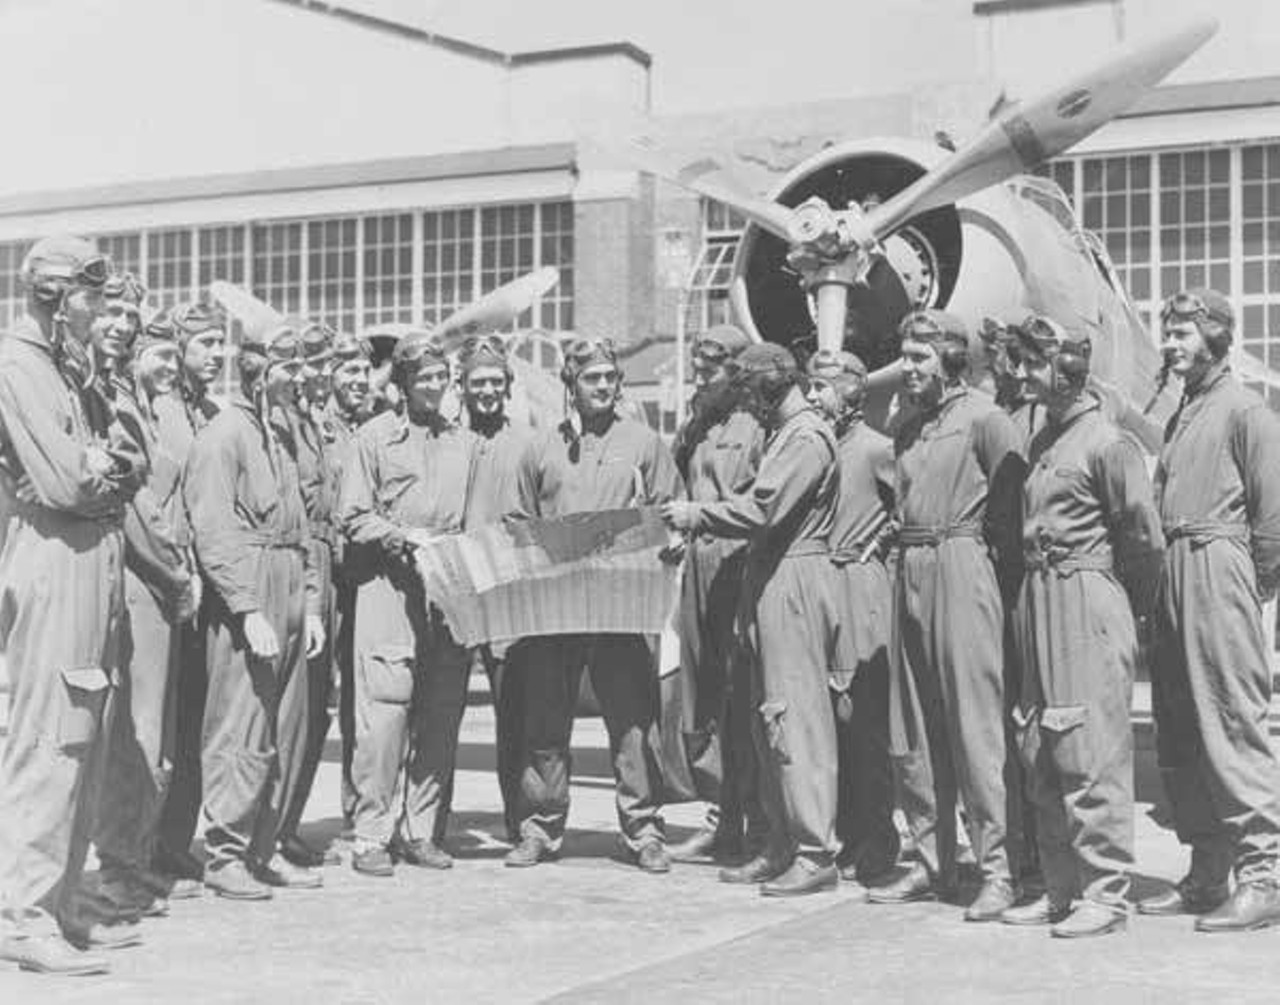 27th Pursuit Squadron at the 1938 Cleveland National Air Races